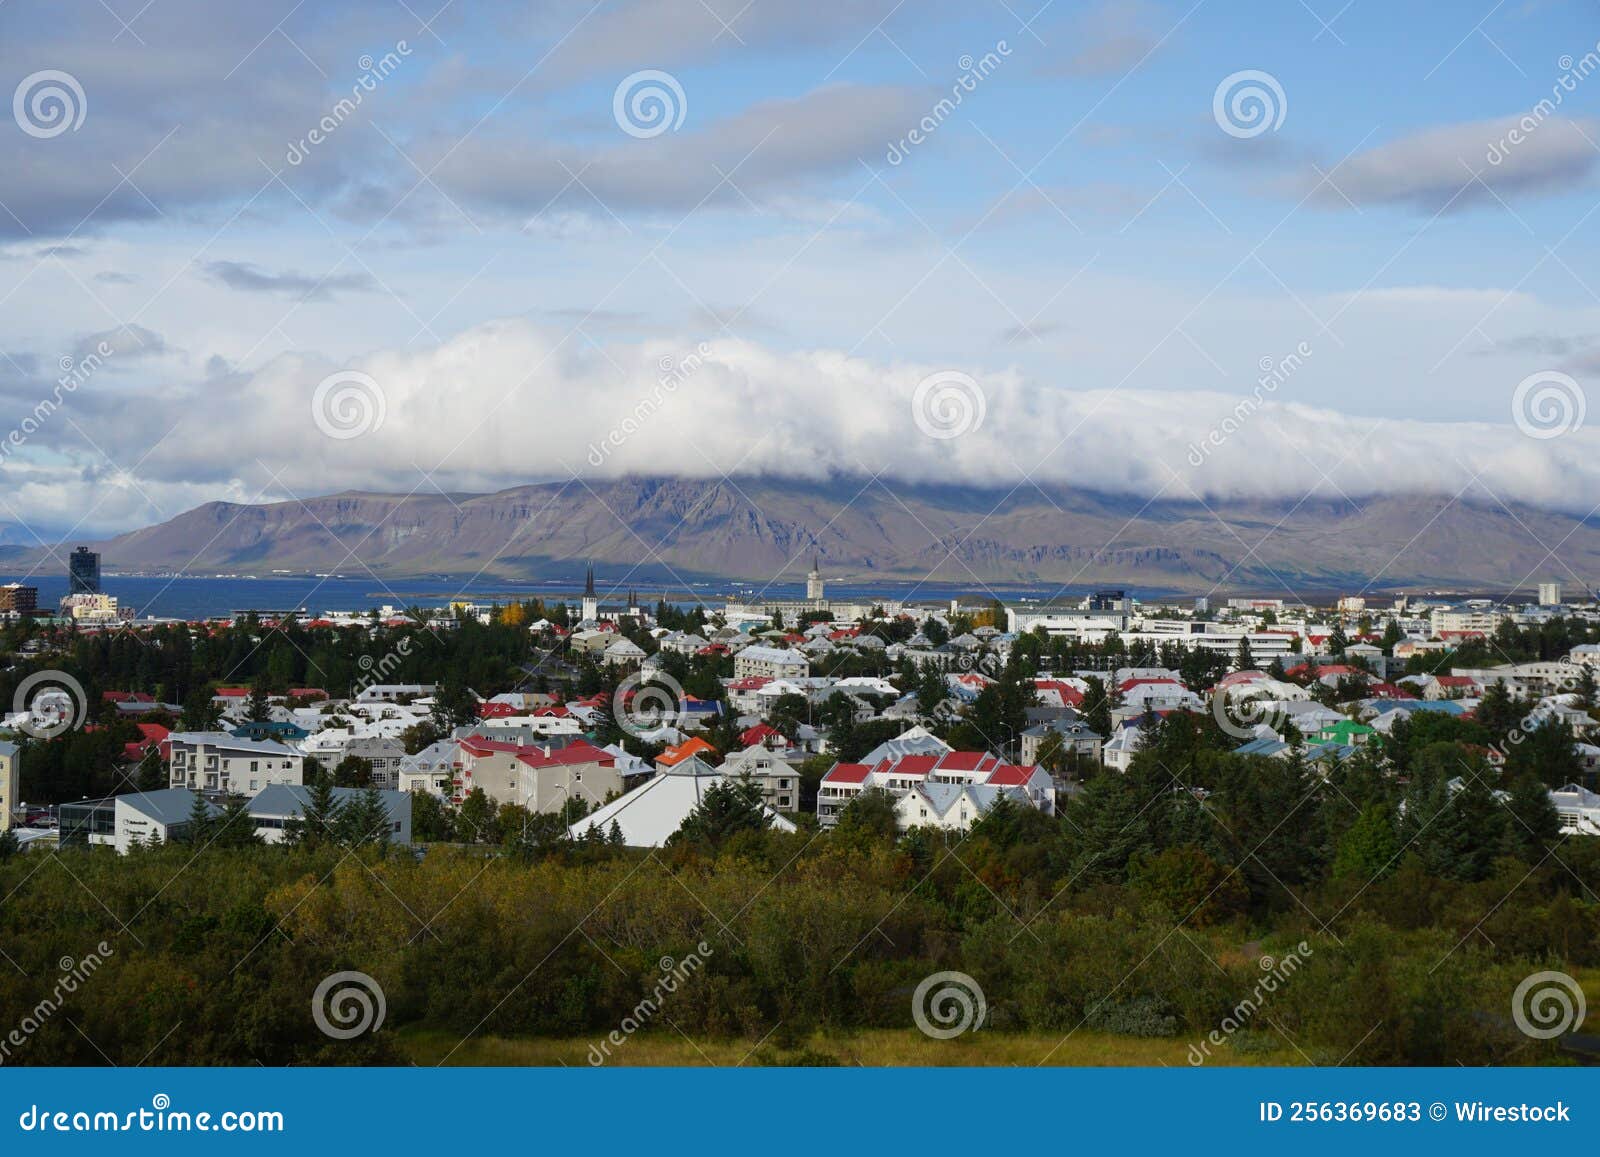 Downtown Reykjavik With Mountains And Clouds In The Background Iceland